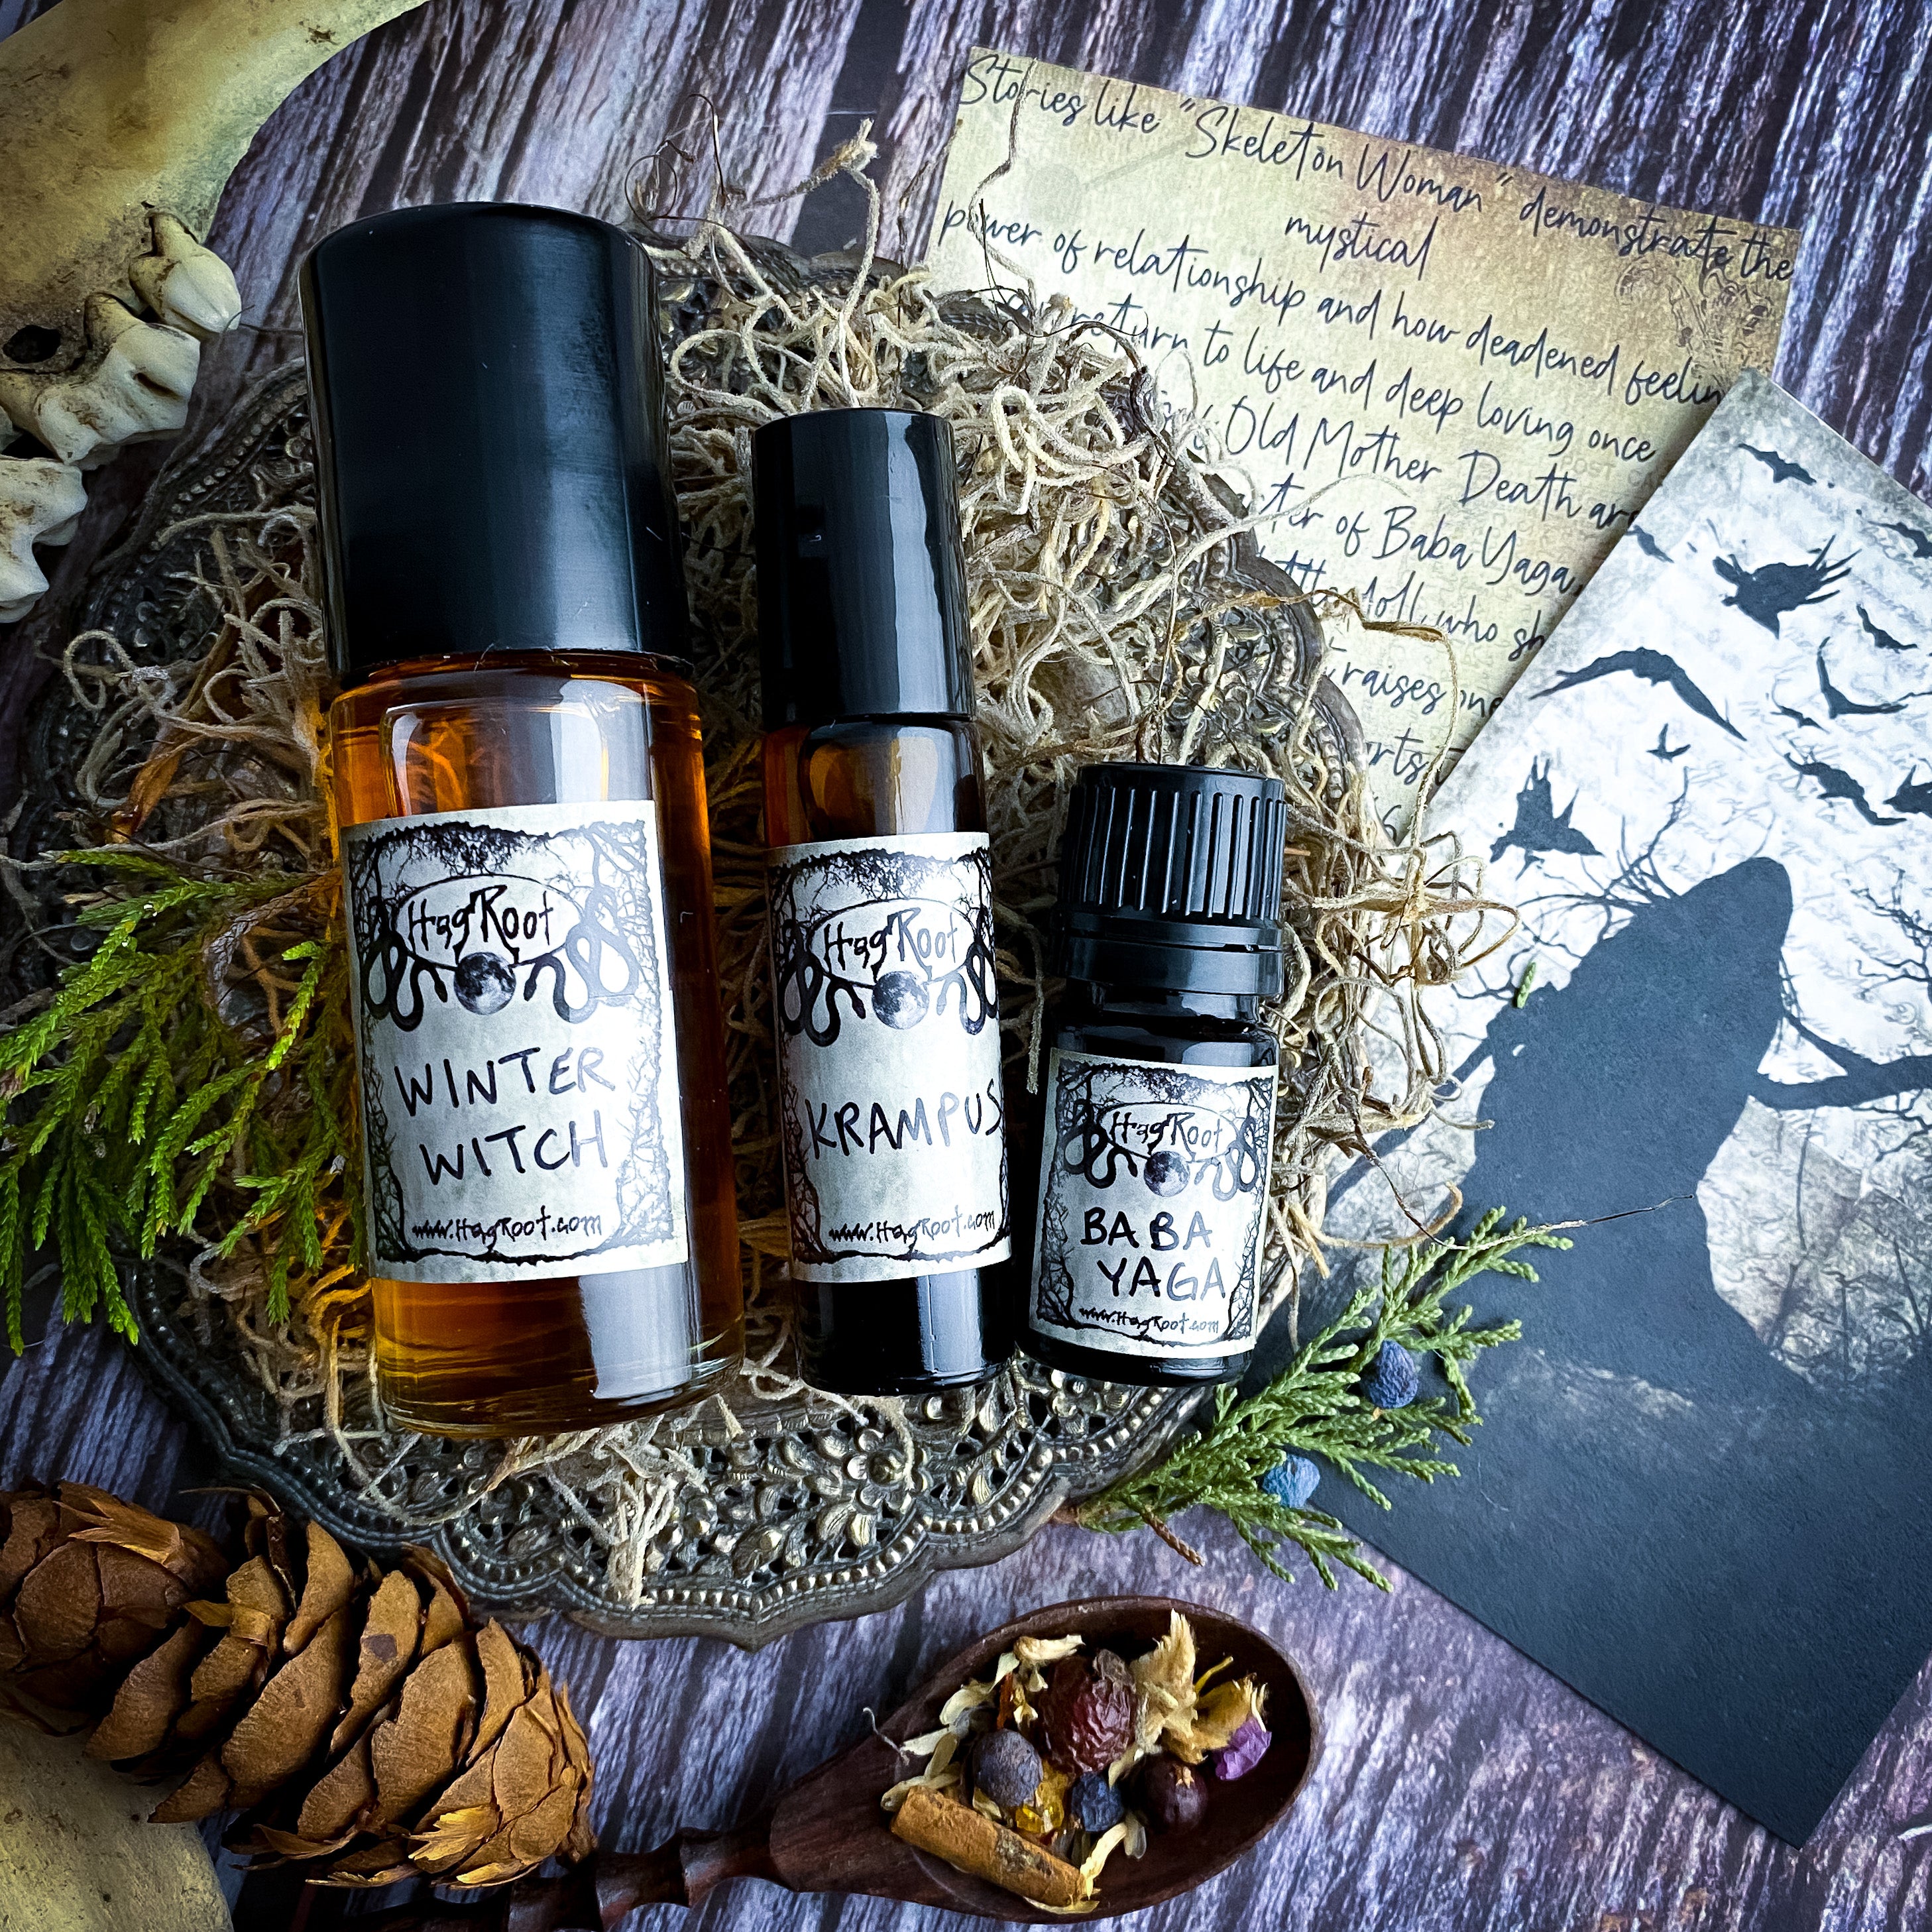 WINTER WITCH-(Peppermint, Cedar, Pine, Roasted Marshmallows)-Perfume, Cologne, Anointing, Ritual Oil